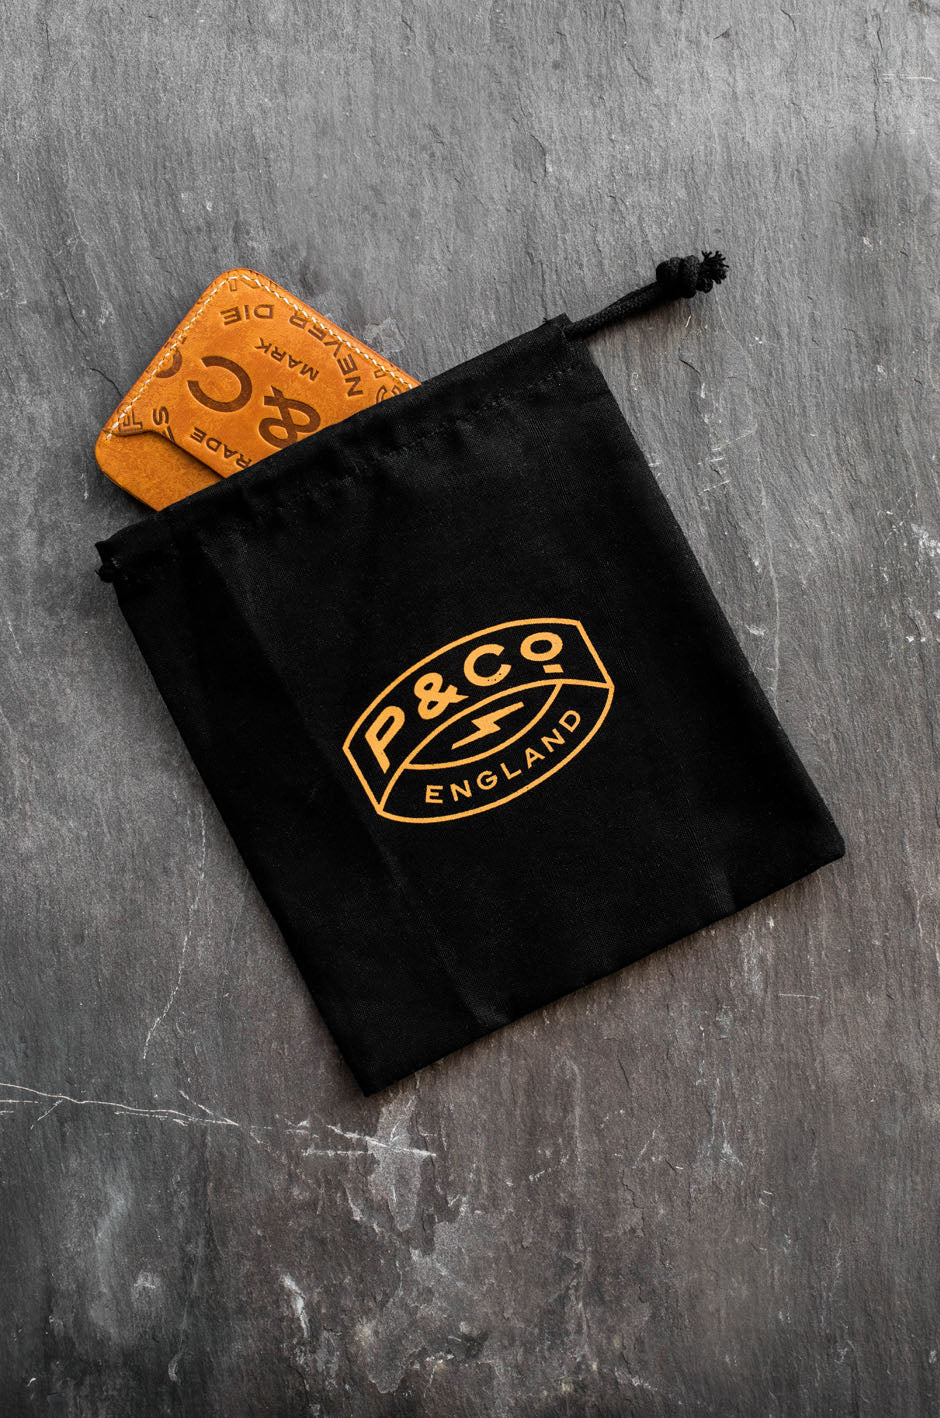 New Branded Packaging – P&Co